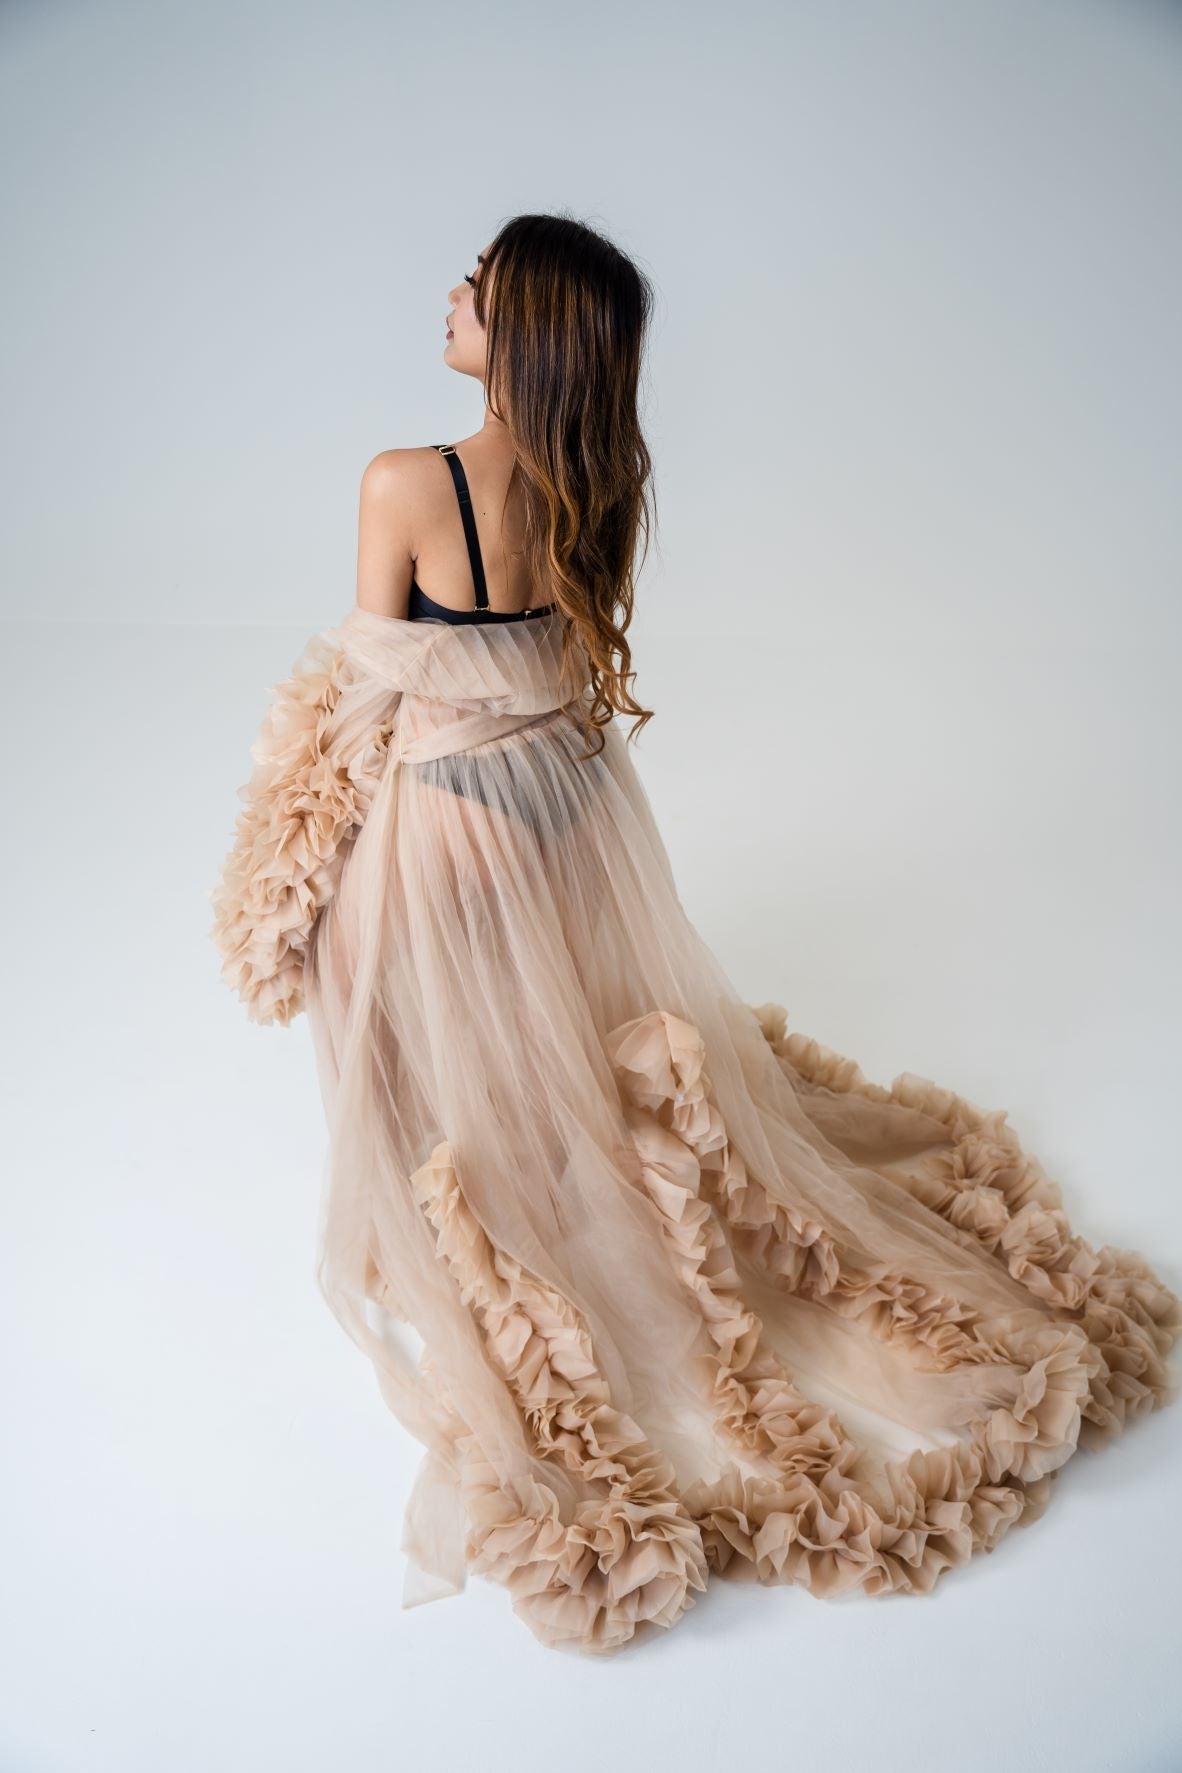 Dress Hire - Maternity Photoshoot Dresses - Lola - Beige Tulle Robe - 4 DAY RENTAL - Luxe Bumps AU